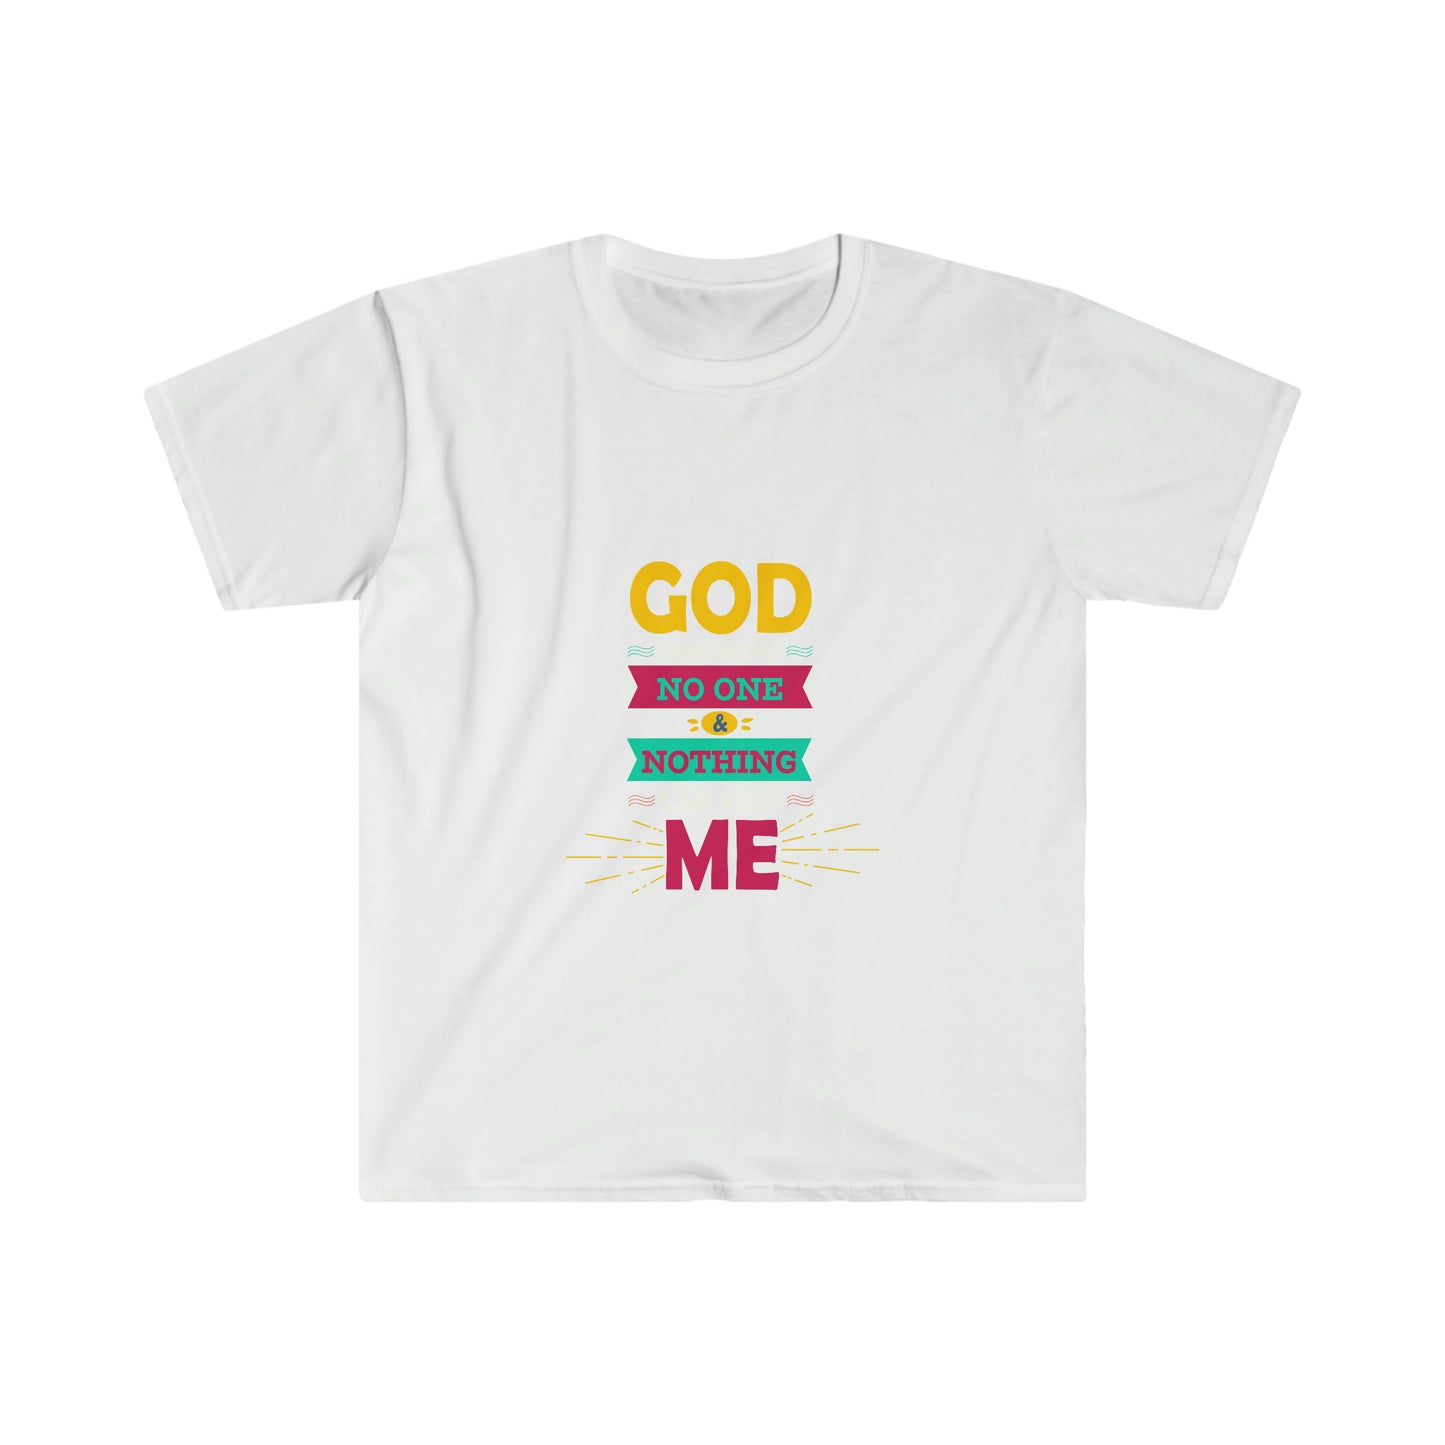 God Before Me No One & Nothing Can Stop Me Unisex T-shirt